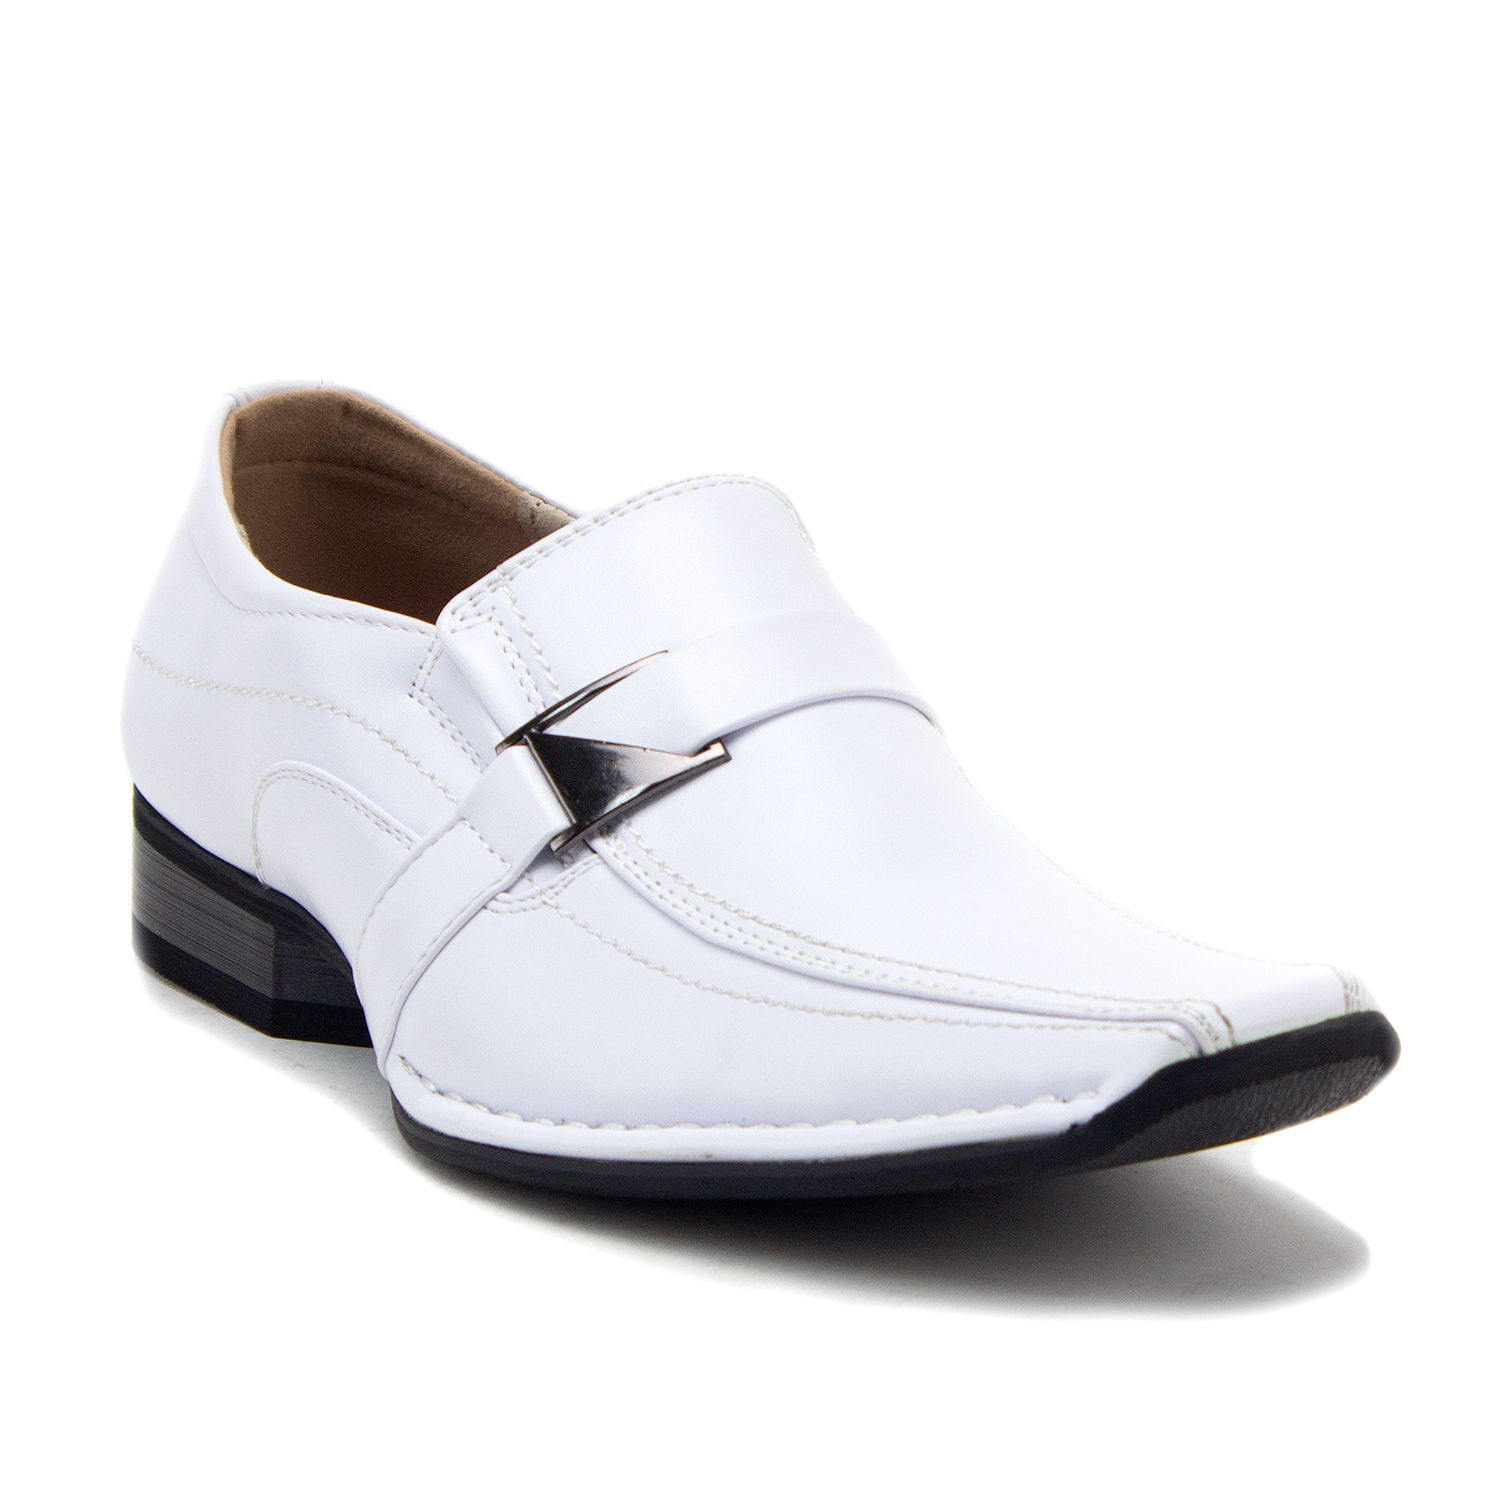 Loafers Dress Shoes 